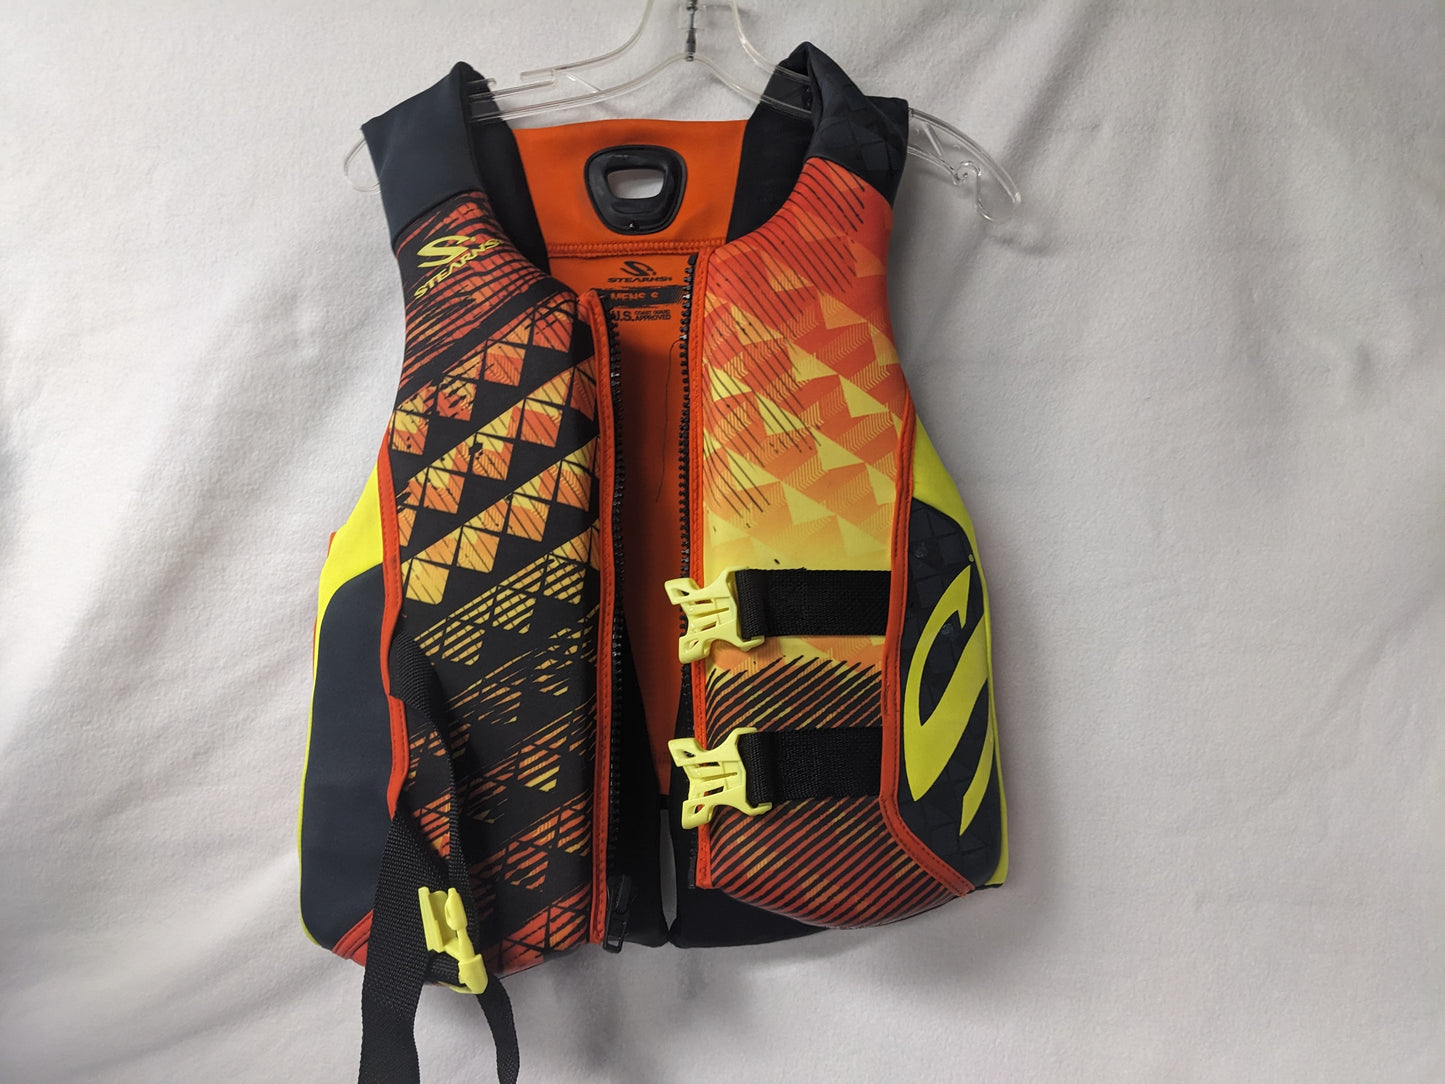 Stearns Type Ill PFD Youth Ski Vest Size Small Color Orange Condition Used